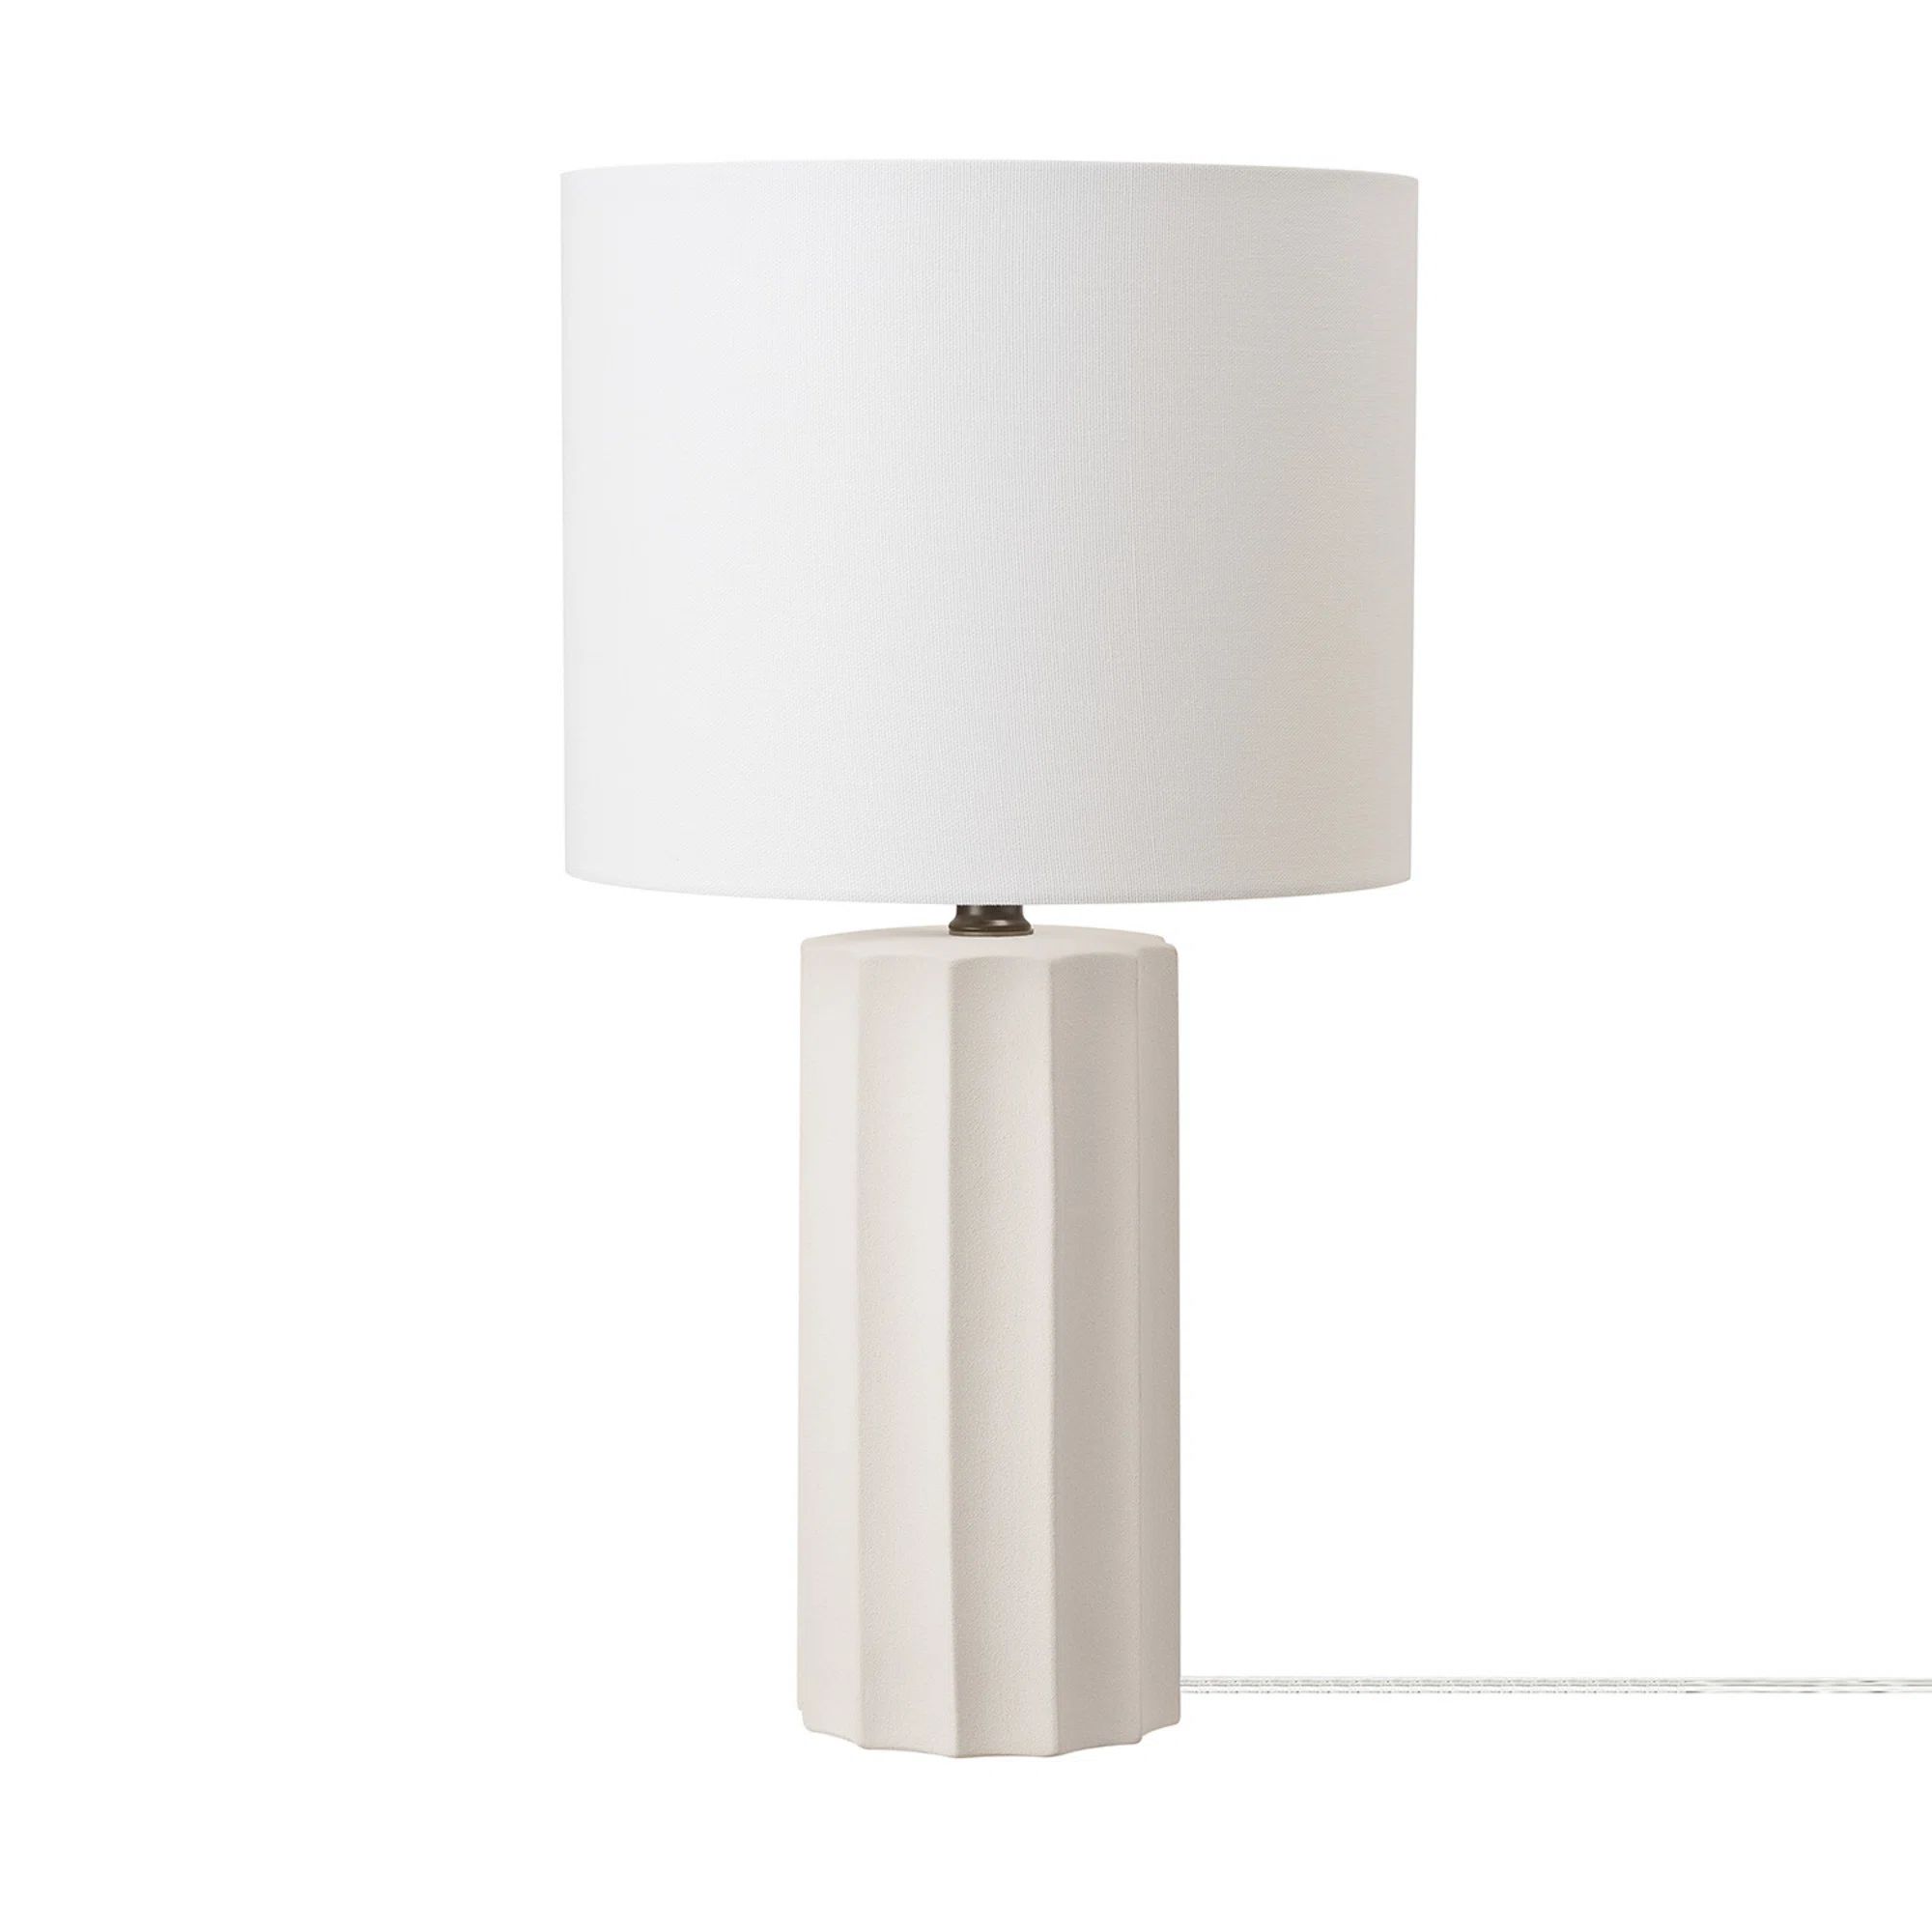 20" Ribbed Concrete Finish Table Lamp with White Linen Shade | Wayfair North America